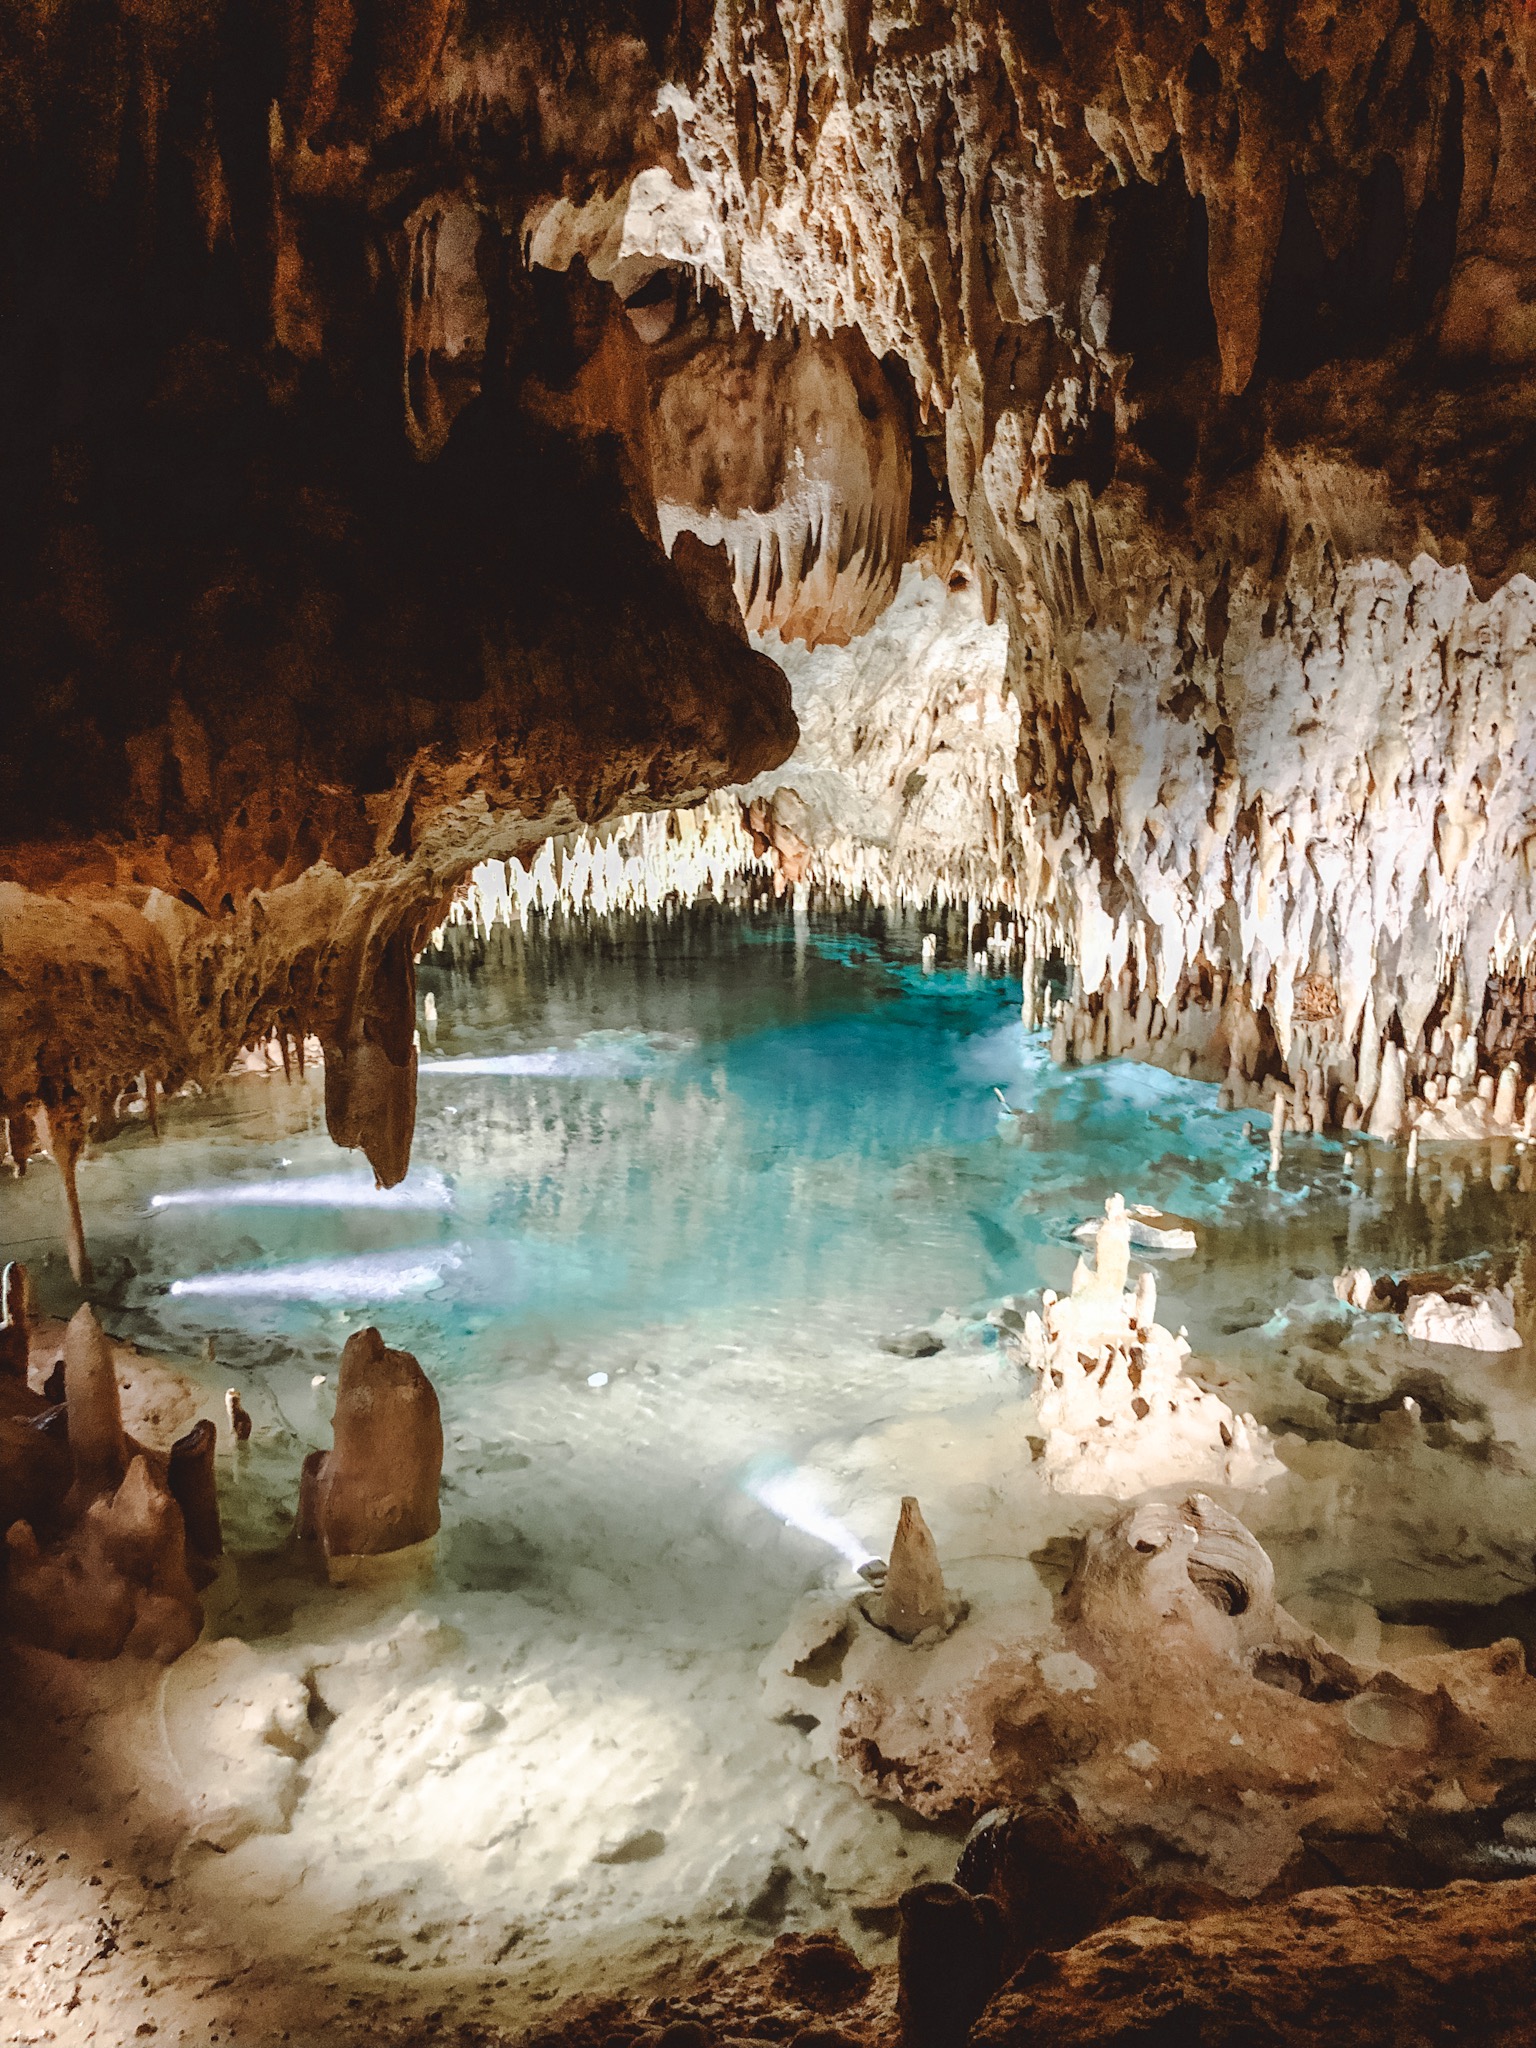 Alyssa Campanella of The A List blog visits Cayman Islands and explores Cayman Crystal Caves